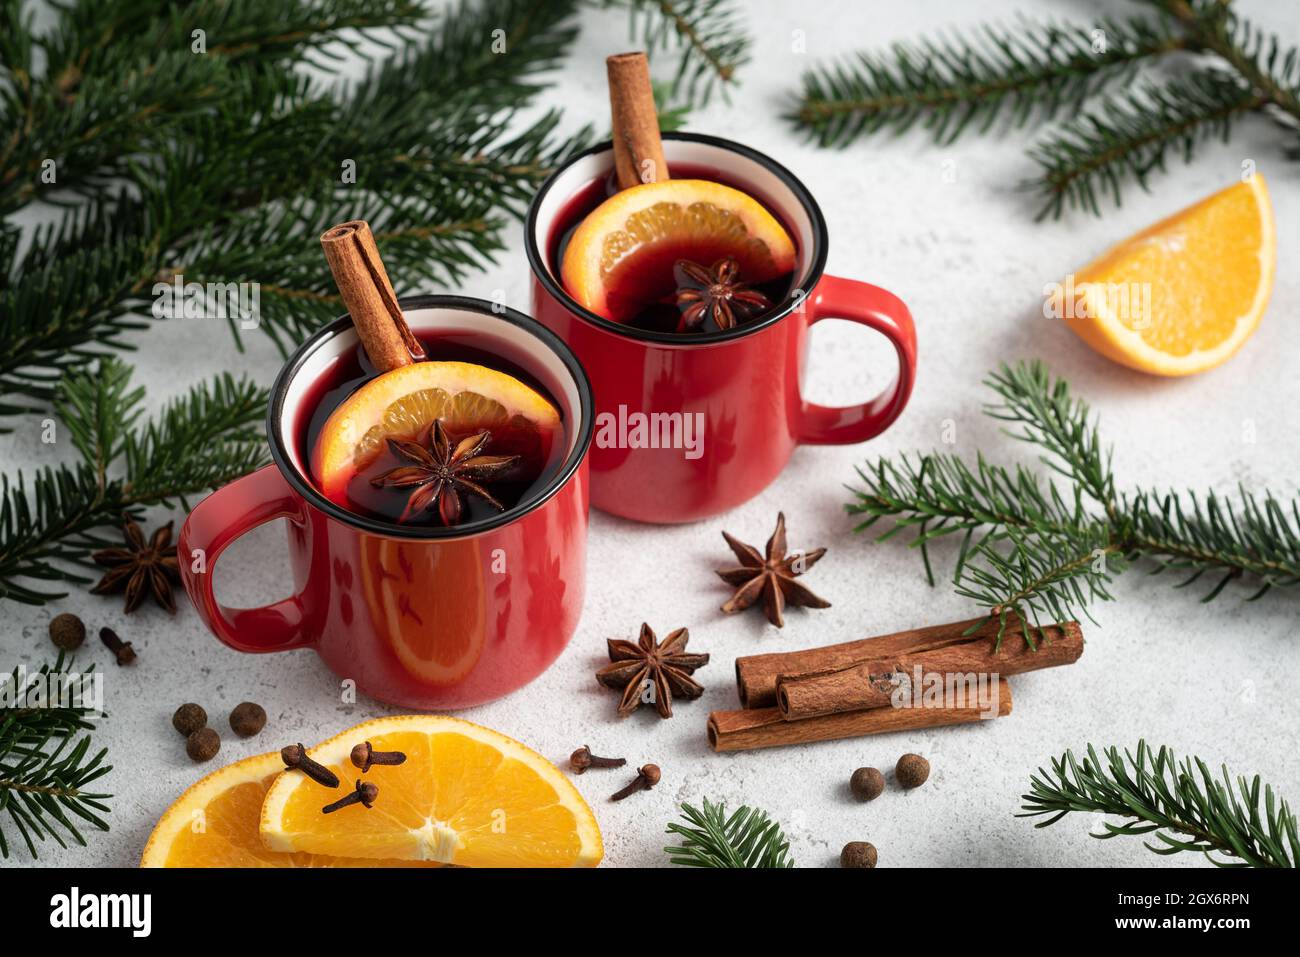 Christmas card with mulled wine in red cups on a white table with fir branches Stock Photo